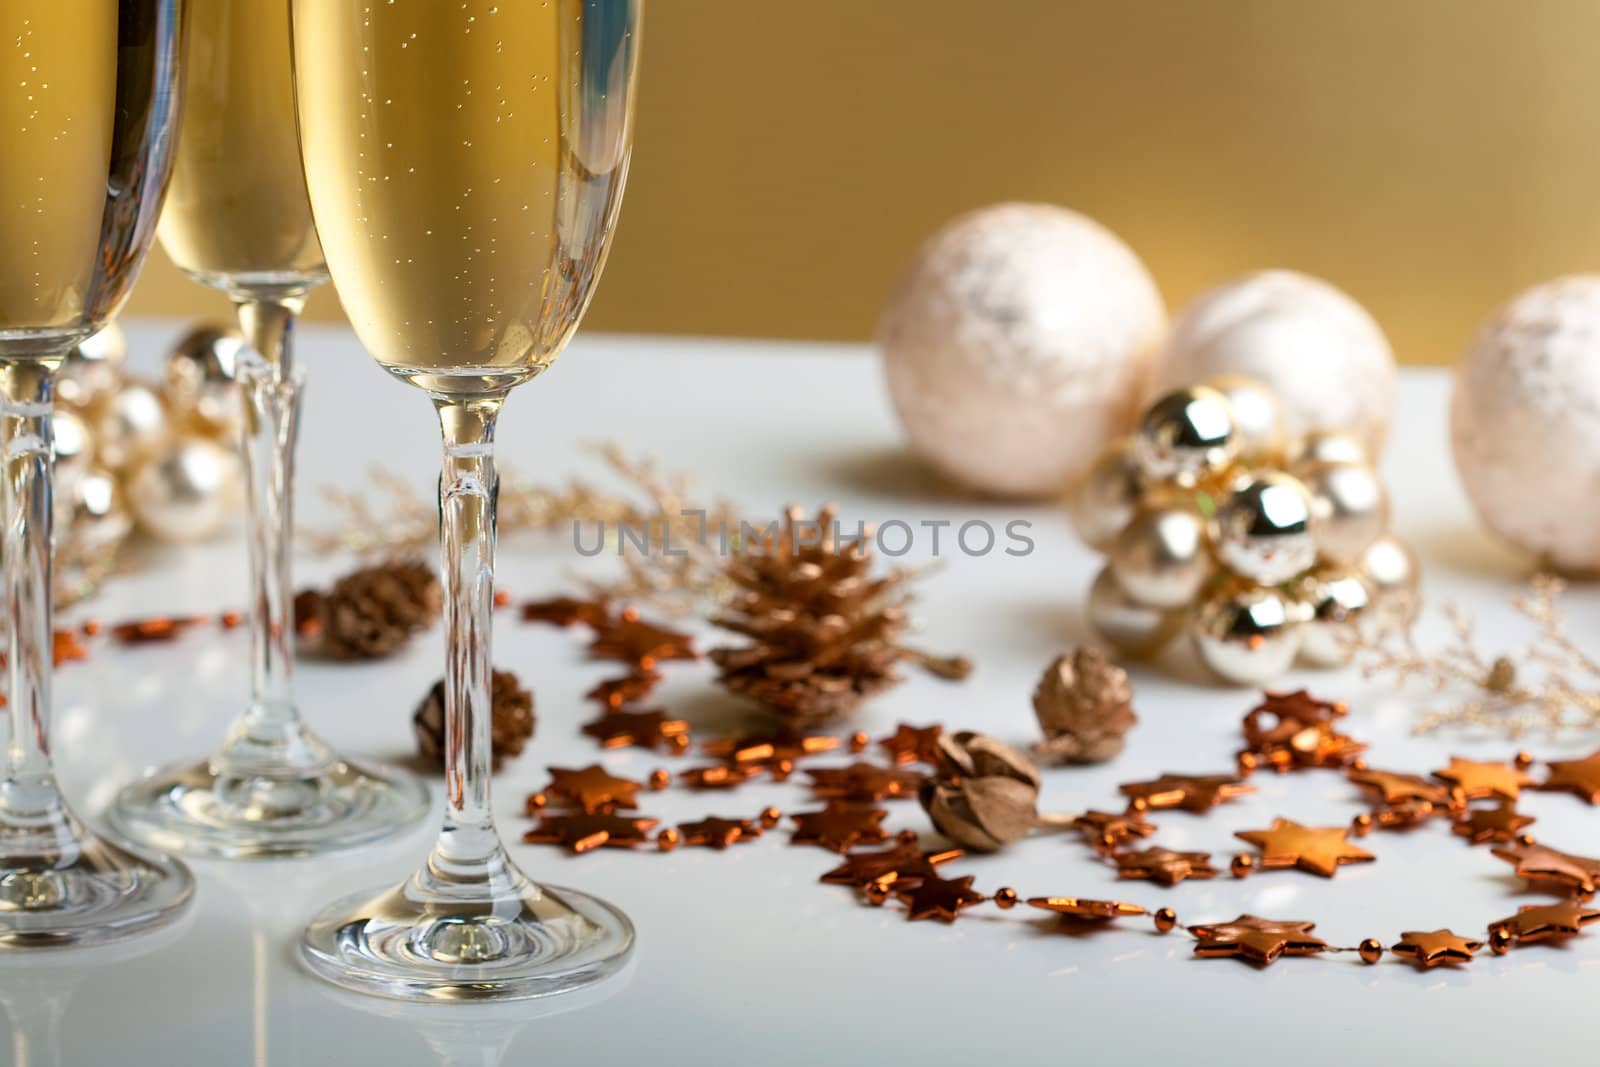 three glasses of champagne, christmas balls and ornaments in front of golden background